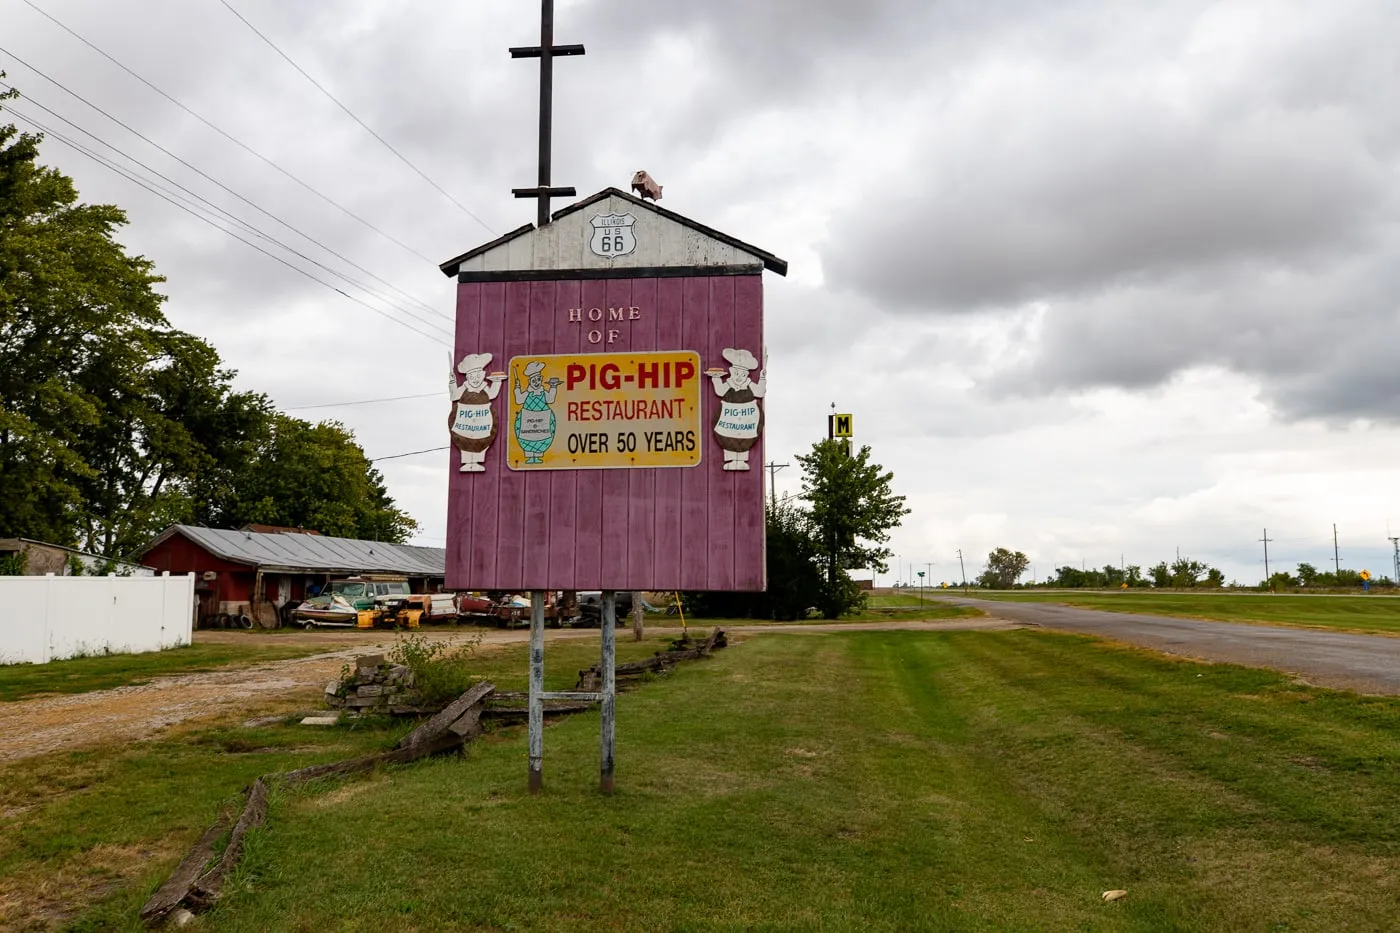 Pig Hip Sign & Restaurant Memorial in Broadwell, Illinois Route 66